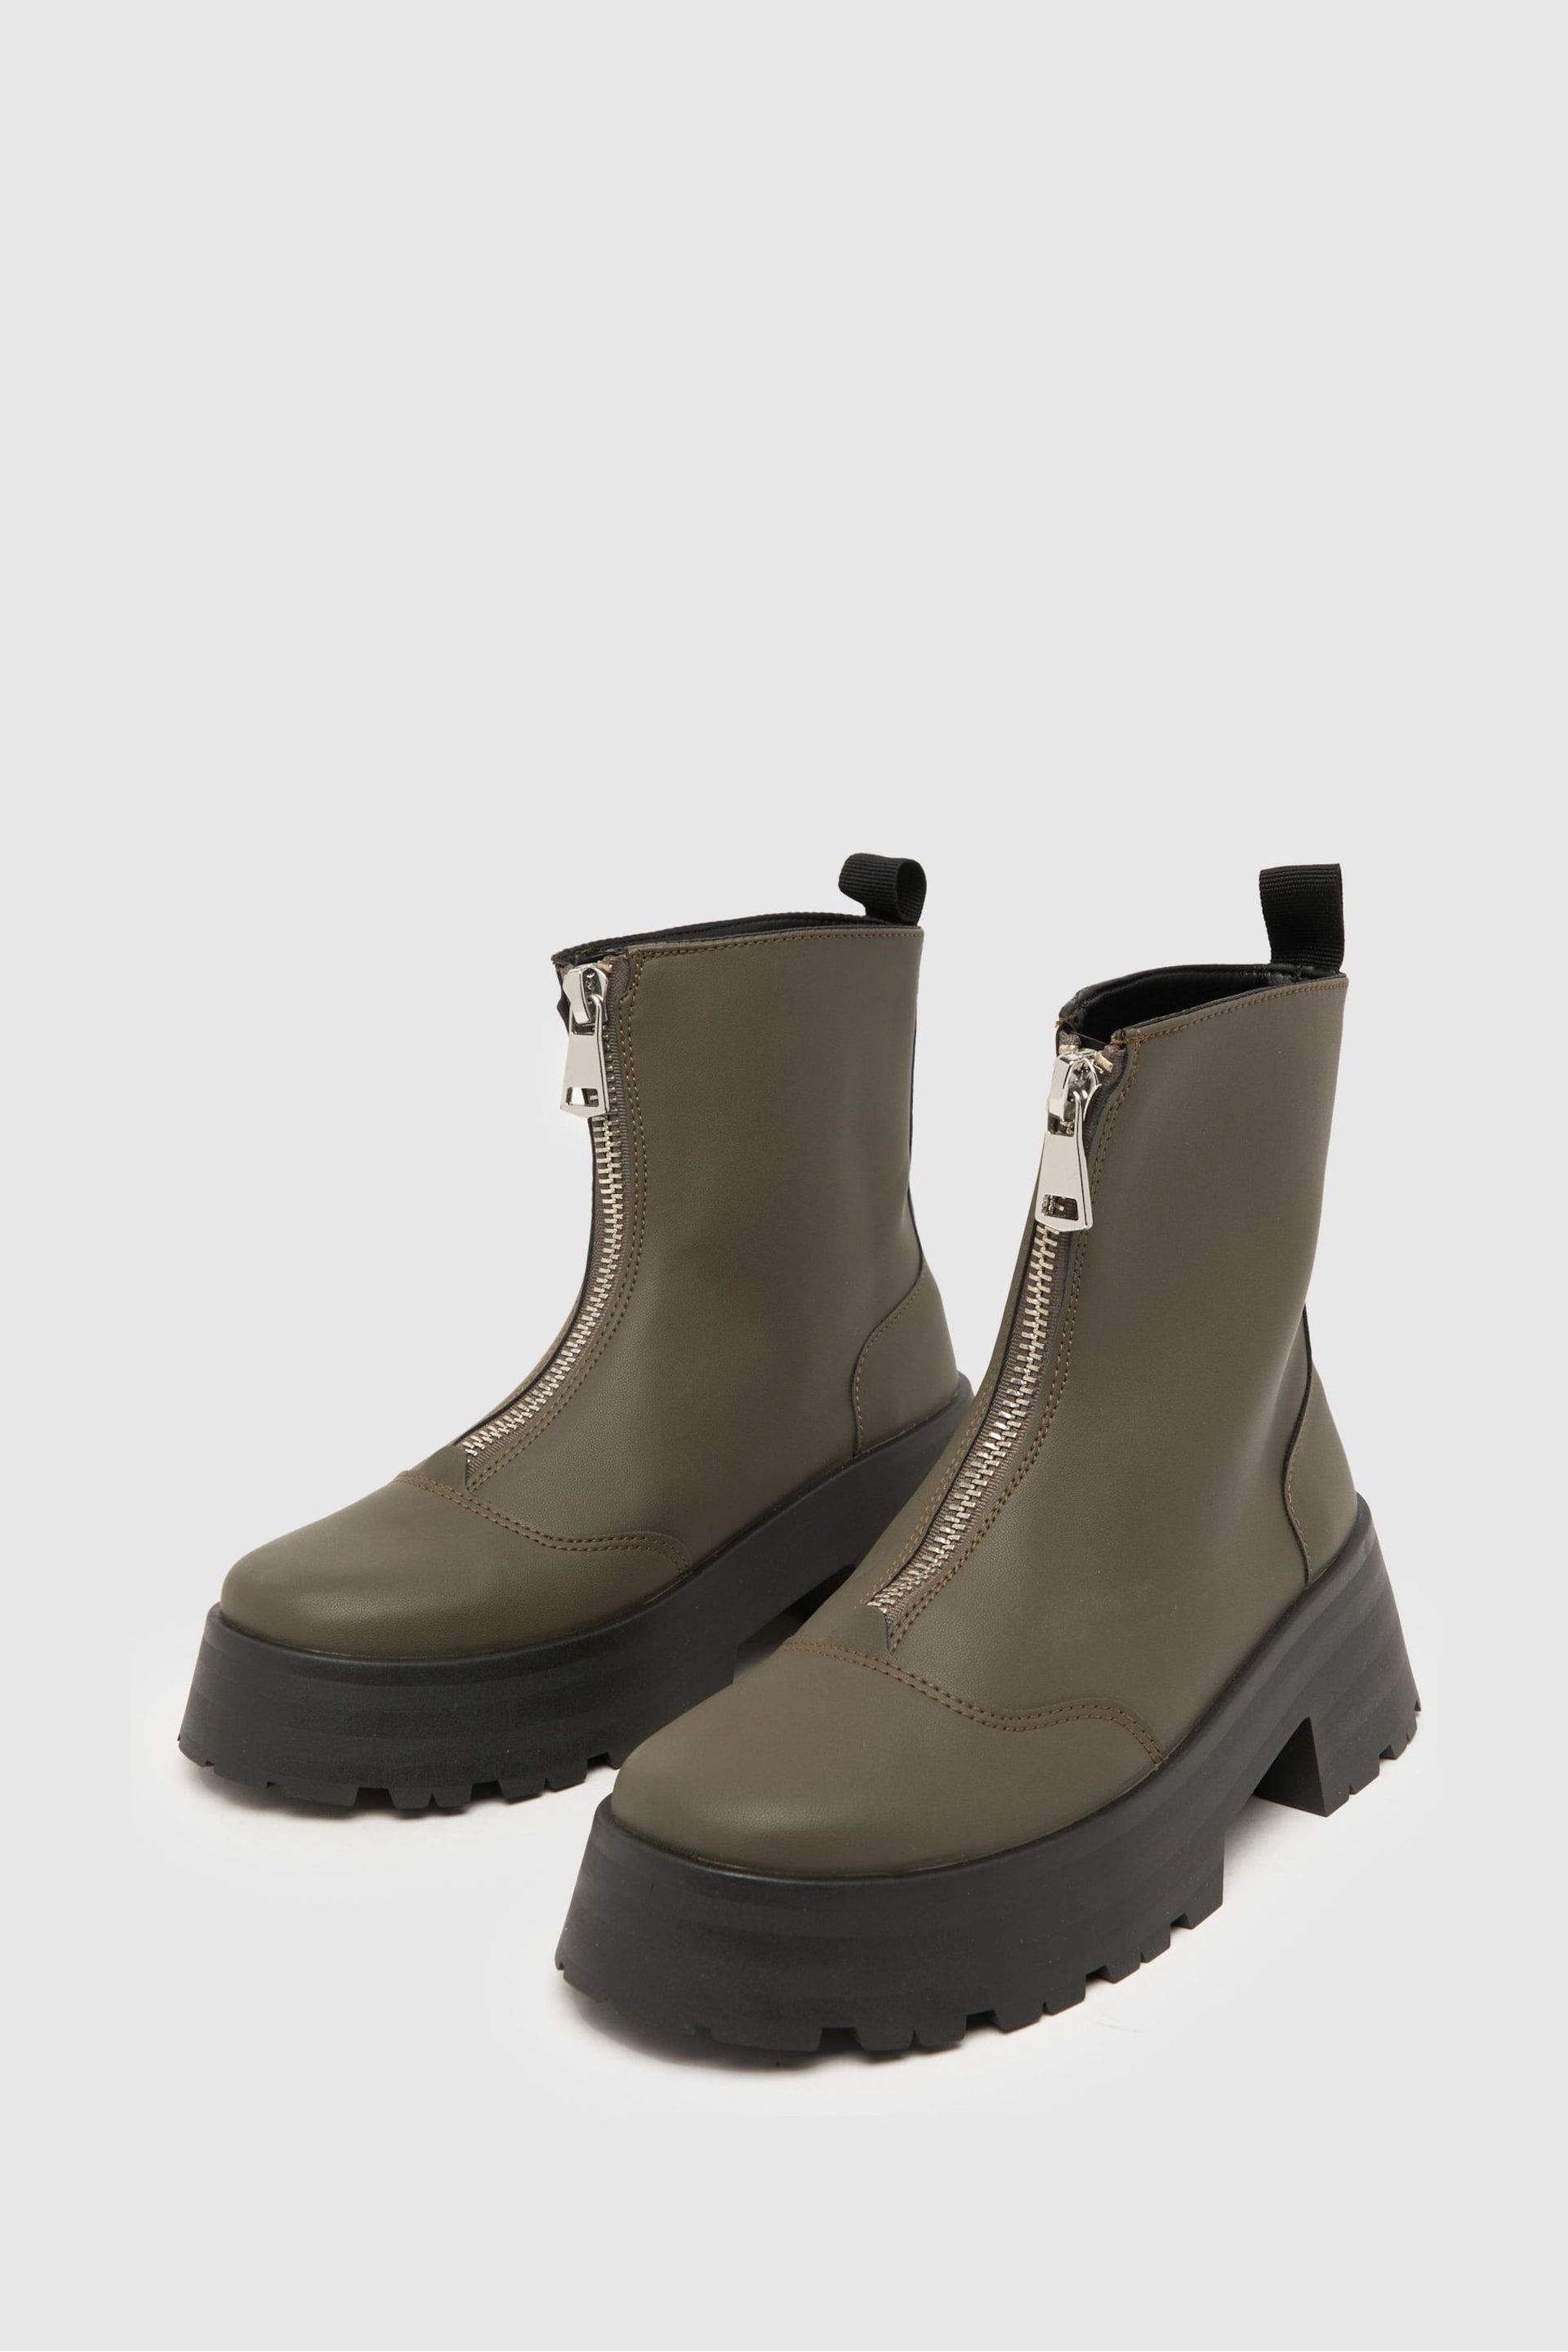 Schuh Arnold Chunky Zip Front Boots - Image 3 of 4